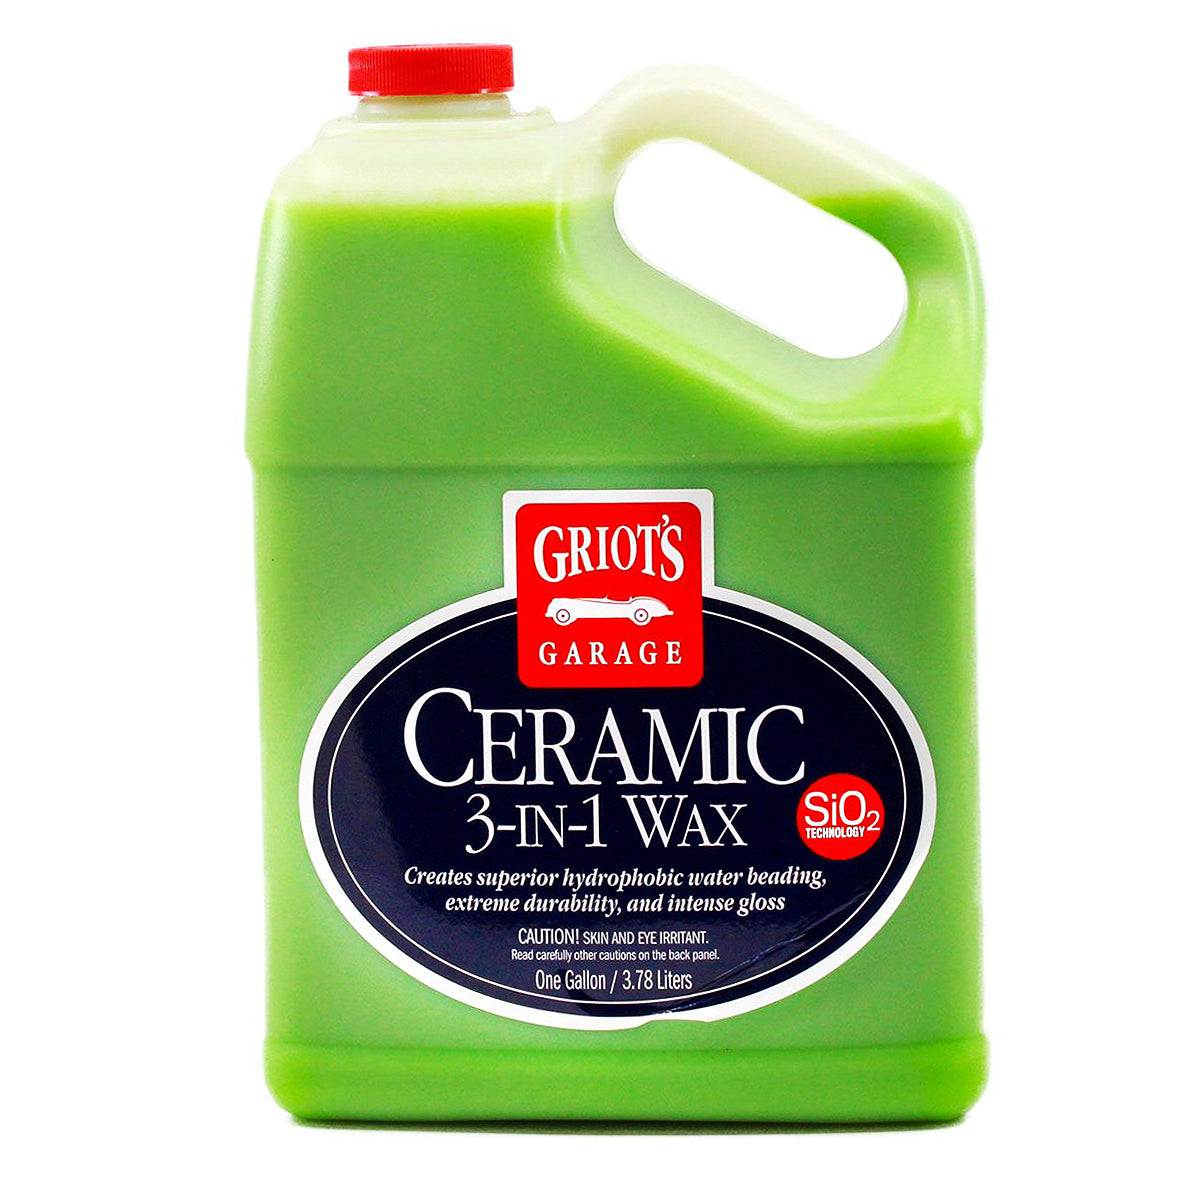 Does Griot's Garage Ceramic 3-in-1 Wax Produce Superior